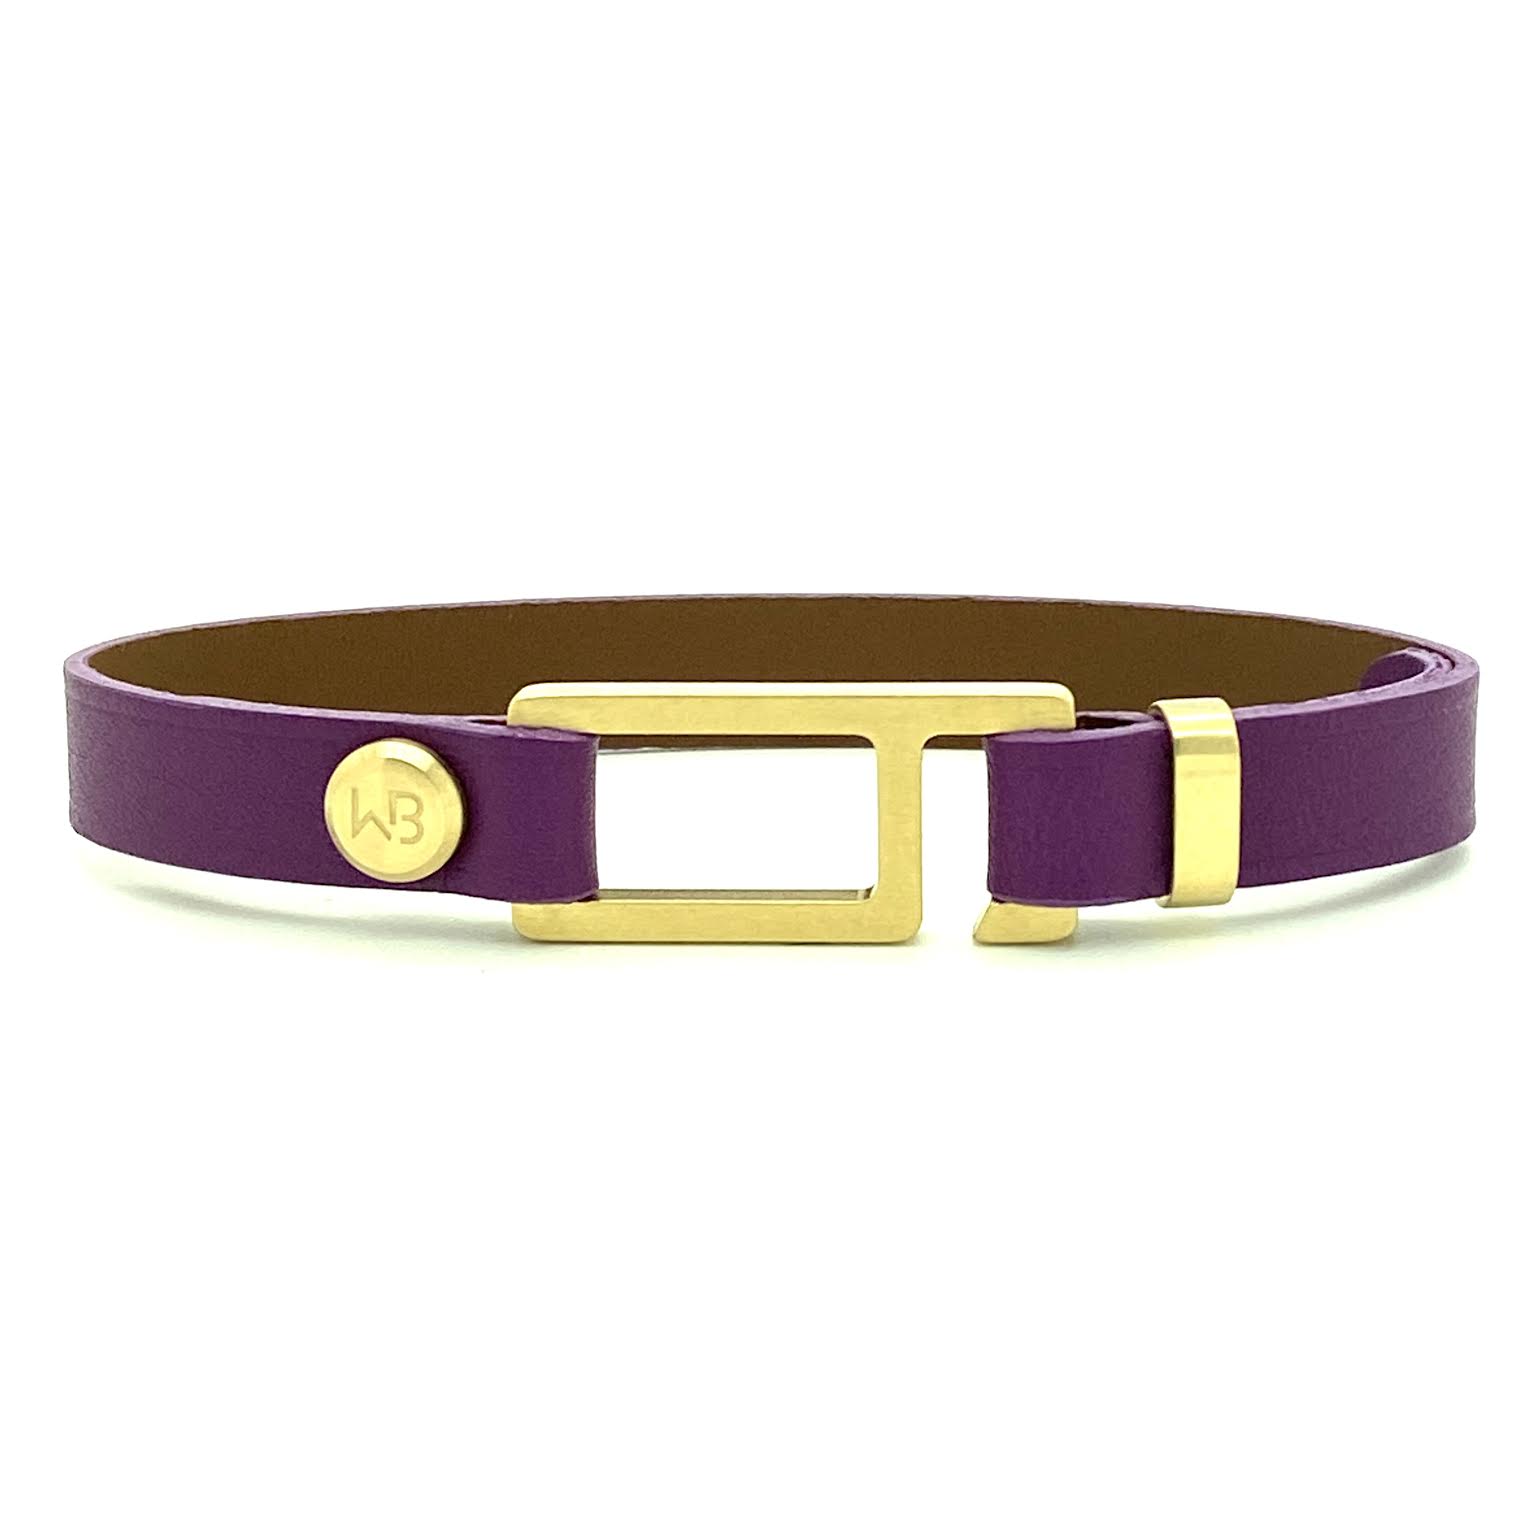 Our striking RMG Pomari Italian leather bracelet is paired perfectly with our artisan designed, lightly brushed hardware. Your hardware choices include Rose Gold, Yellow Gold, Stainless Steel or Black Ceramic. This adjustable size bracelet is a distinctive piece worn alone or with a WristBend stacking bracelet. Made by WristBend